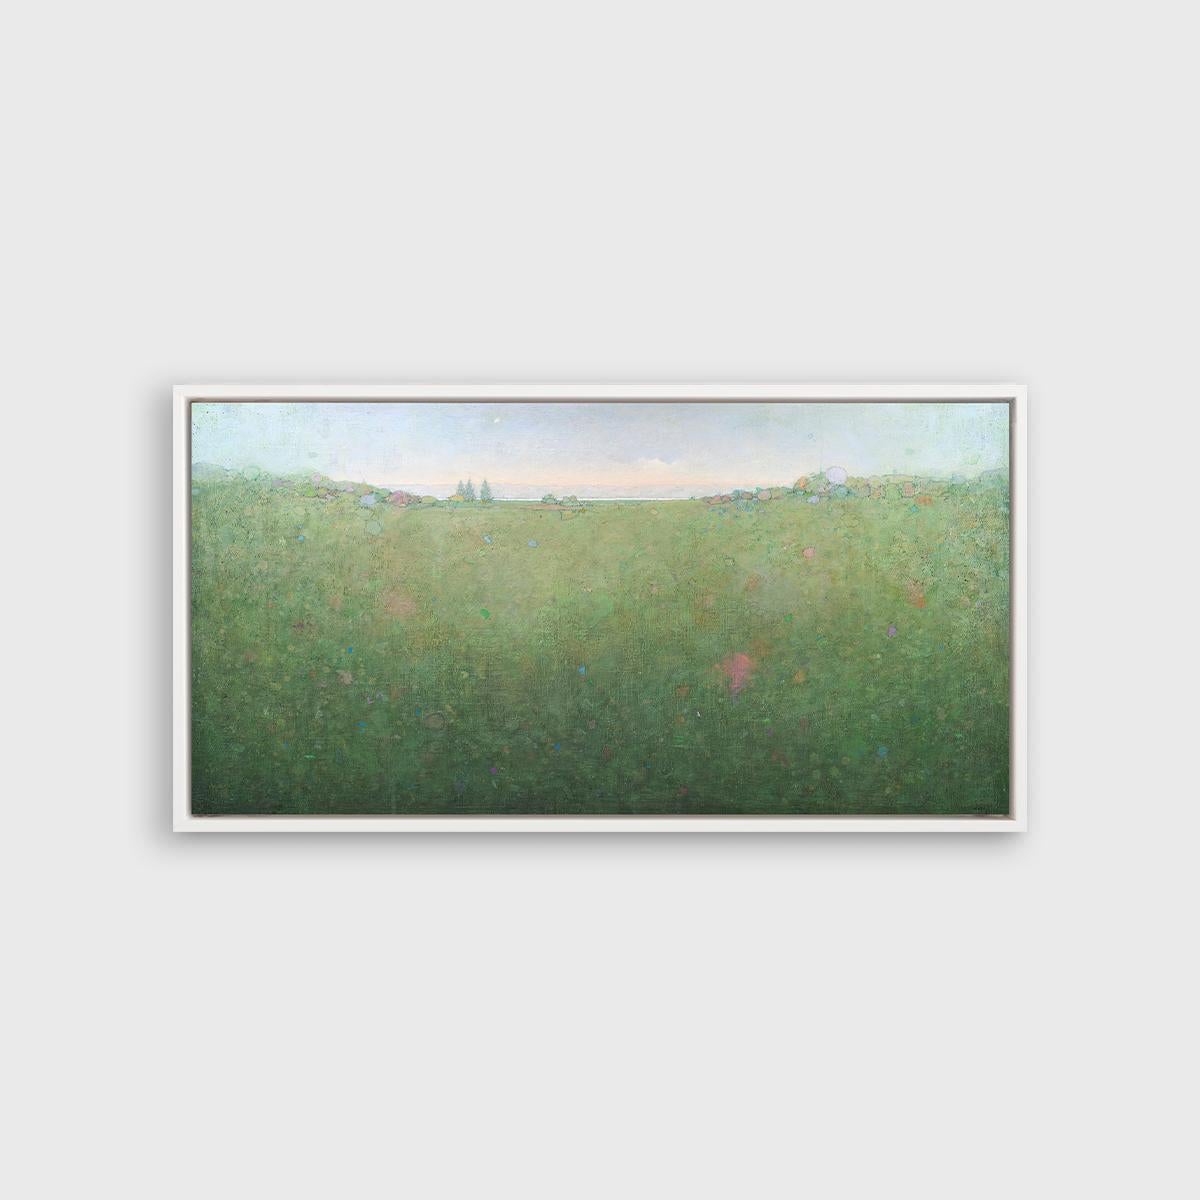 This abstract landscape limited edition print by Elwood Howell features a cool, green and pale blue palette. The artist's signature high horizon line forms a very slight valley at the center, with shapes like foliage and trees in different pale